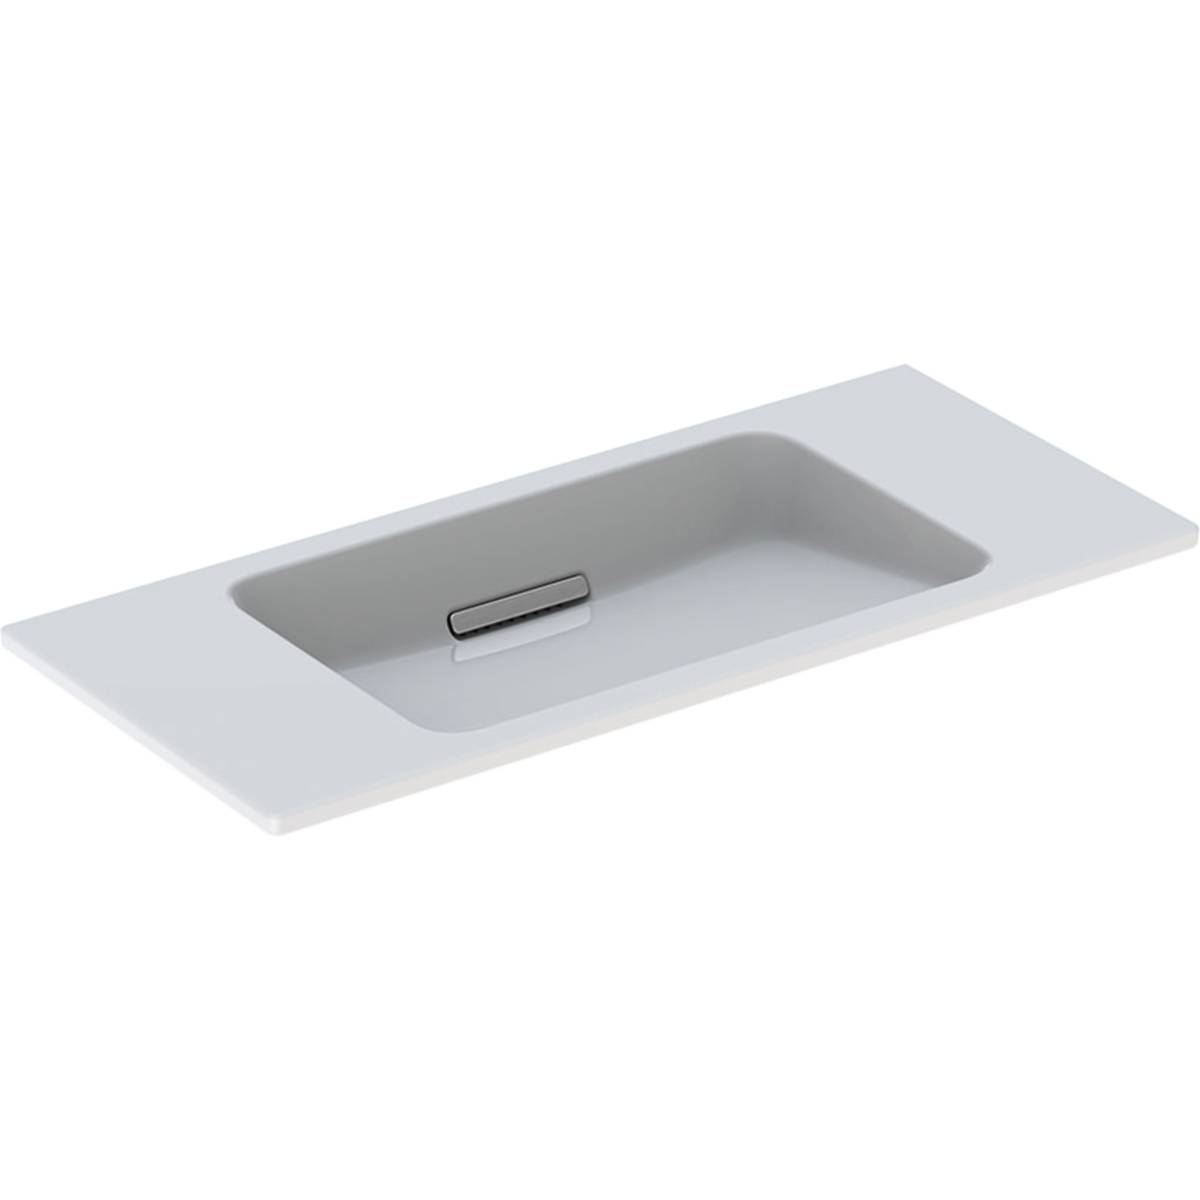 ONE Washbasin, Floating Design, Horizontal Outlet, Small Projection